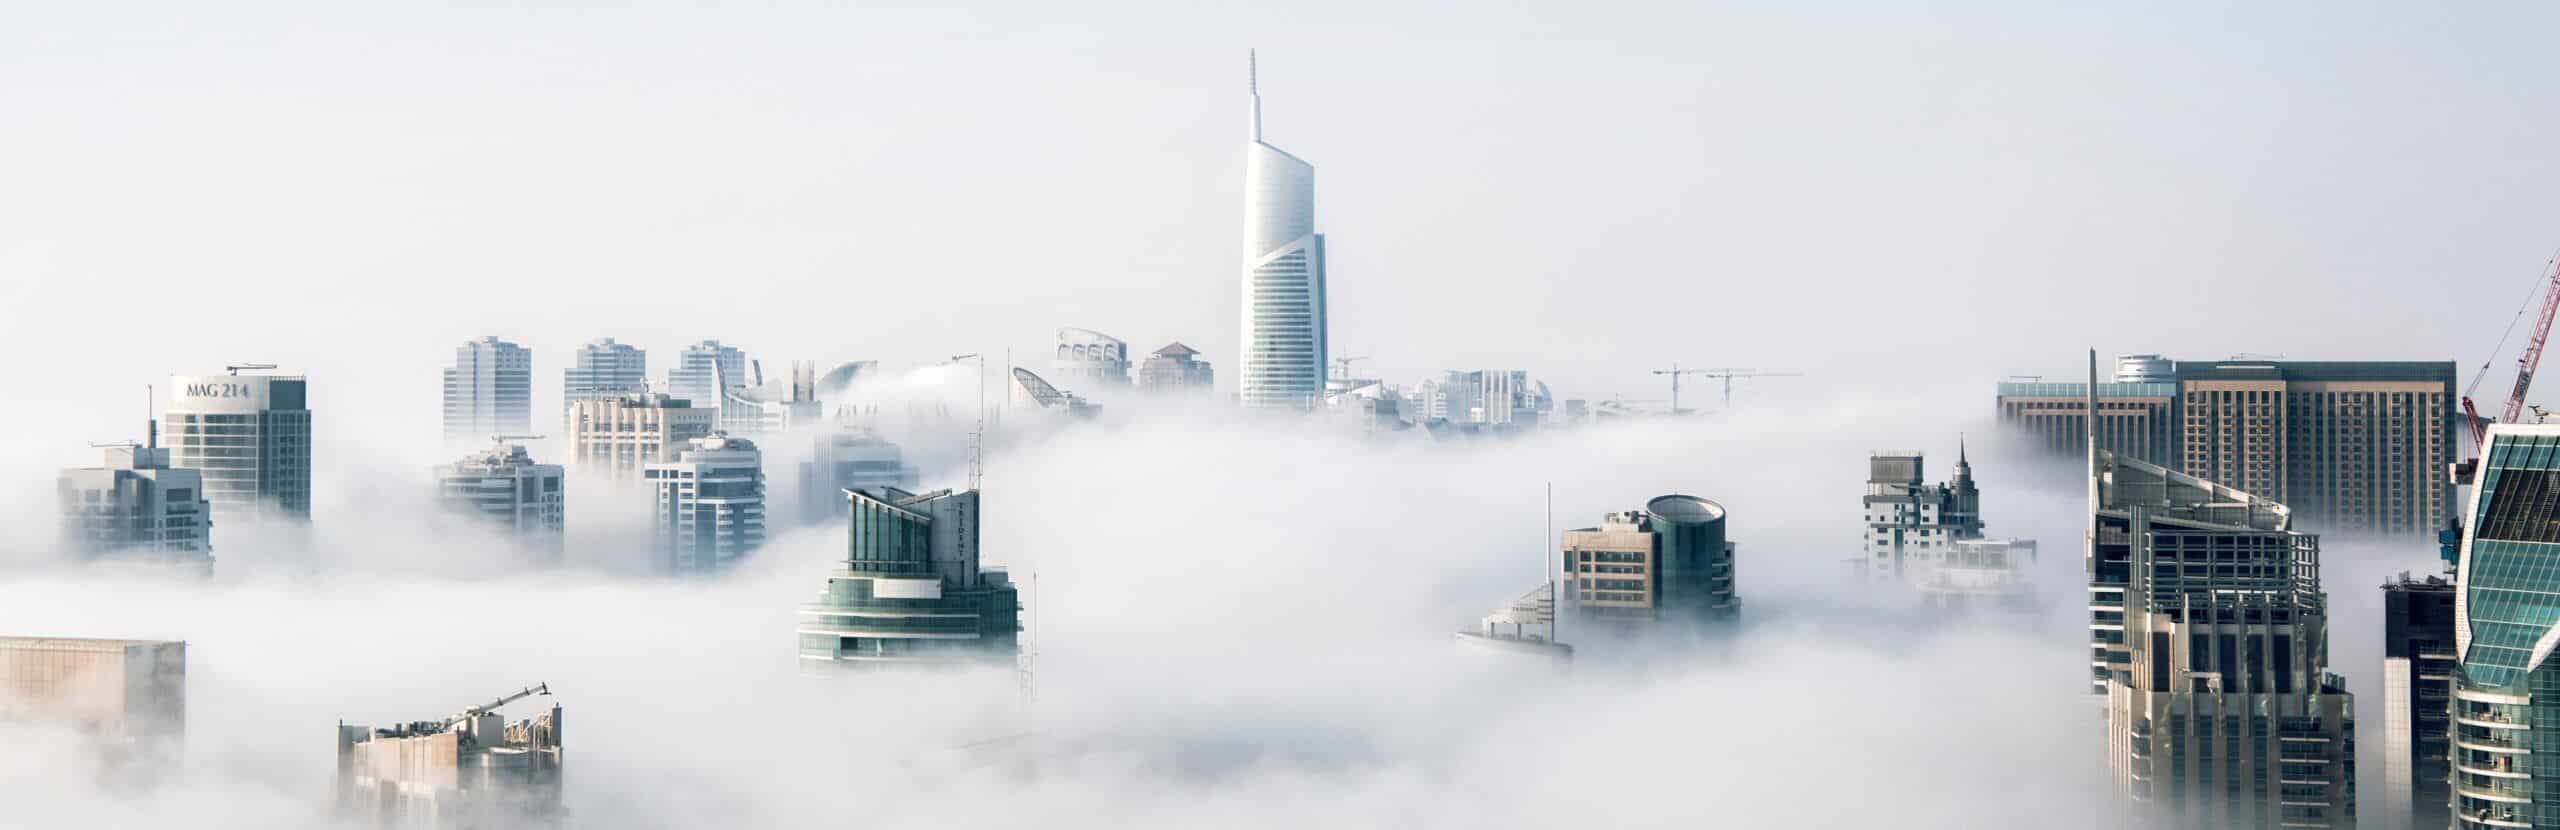 A city covered in clouds with tall buildings in the background.